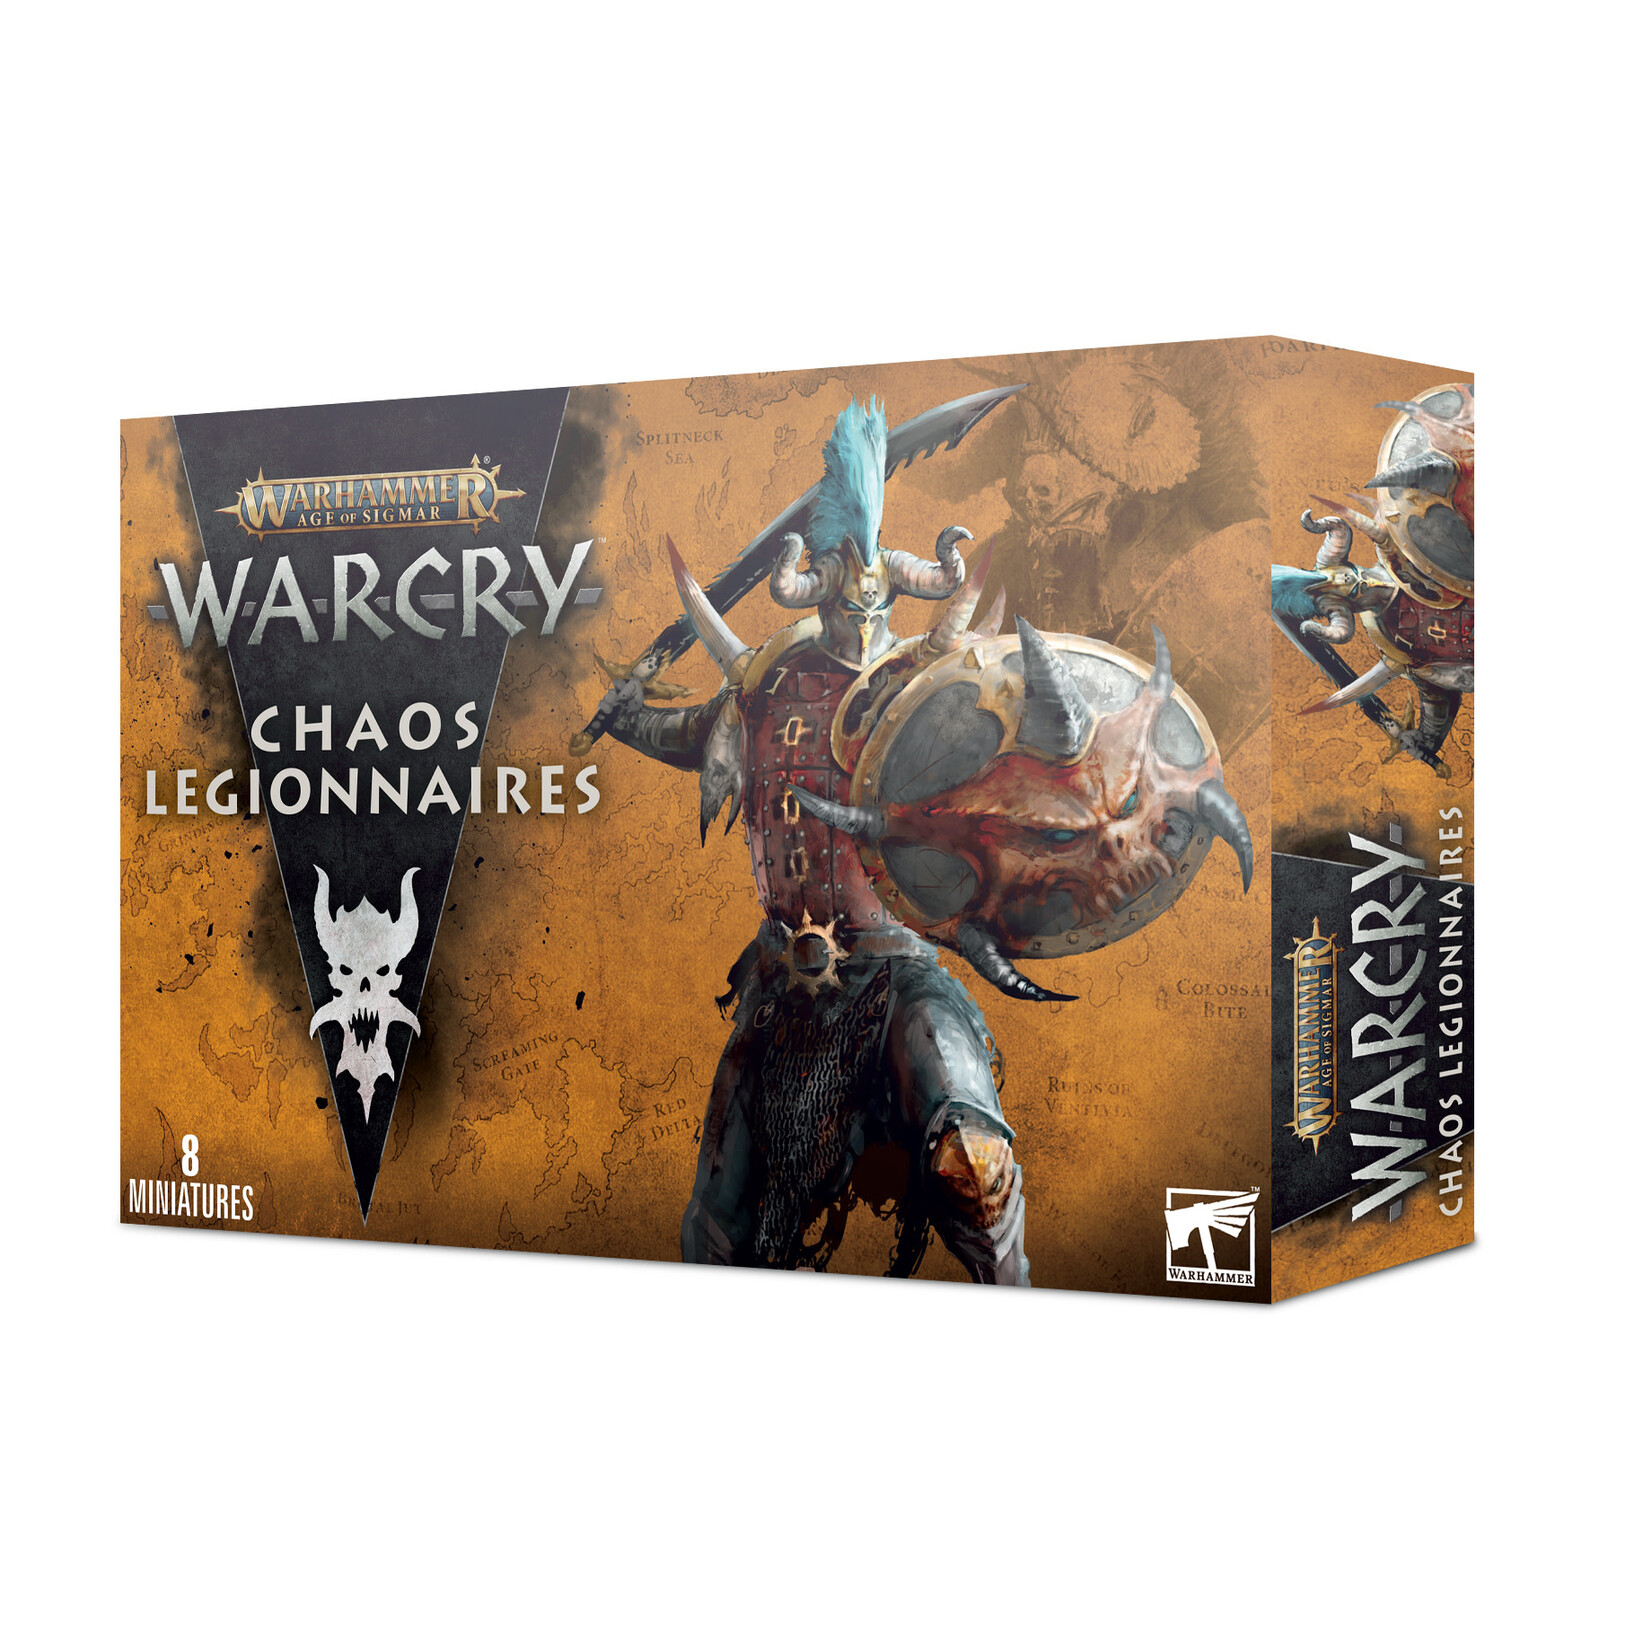 Games Workshop Warhammer Age of Sigmar: Warcry - Chaos Legionaires - Fair  Game